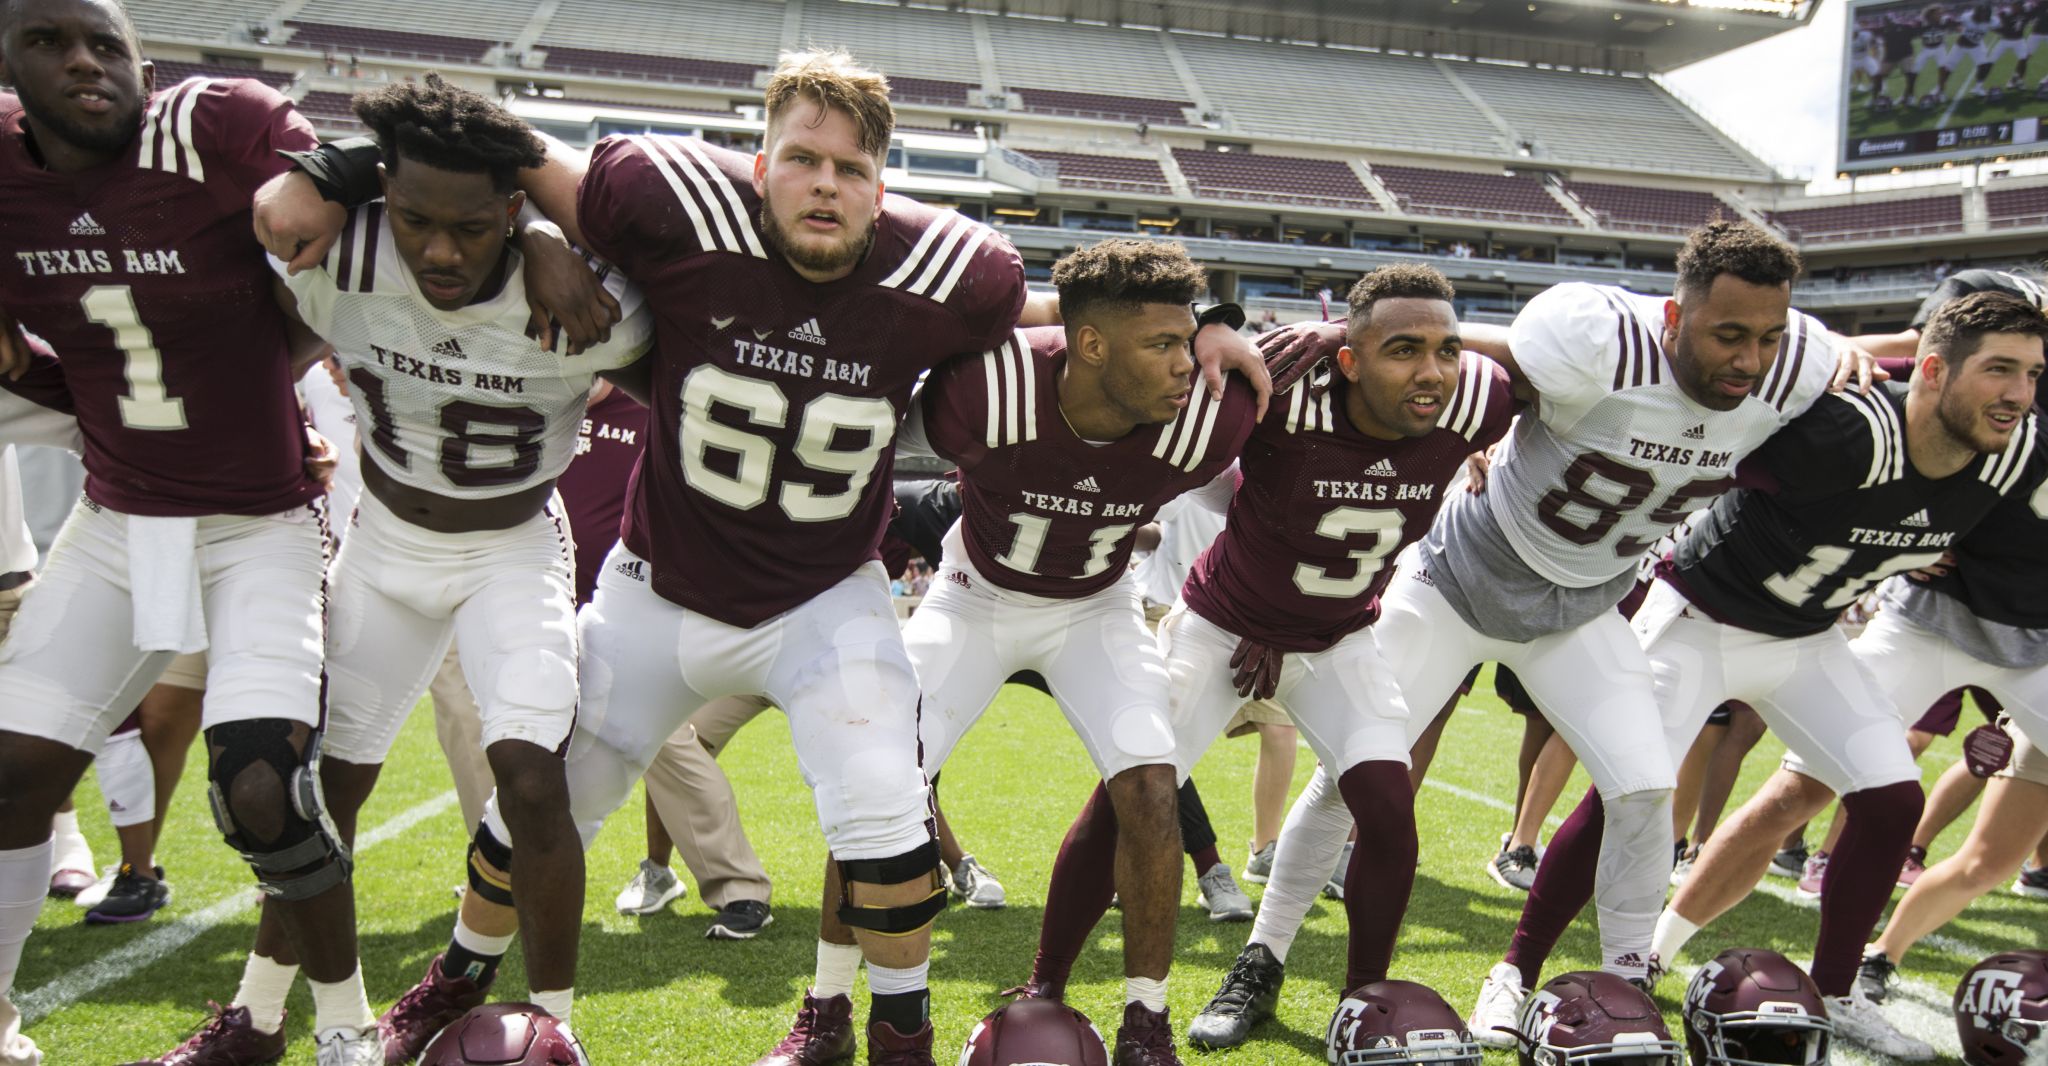 Texas A&M spring game to be held April 14